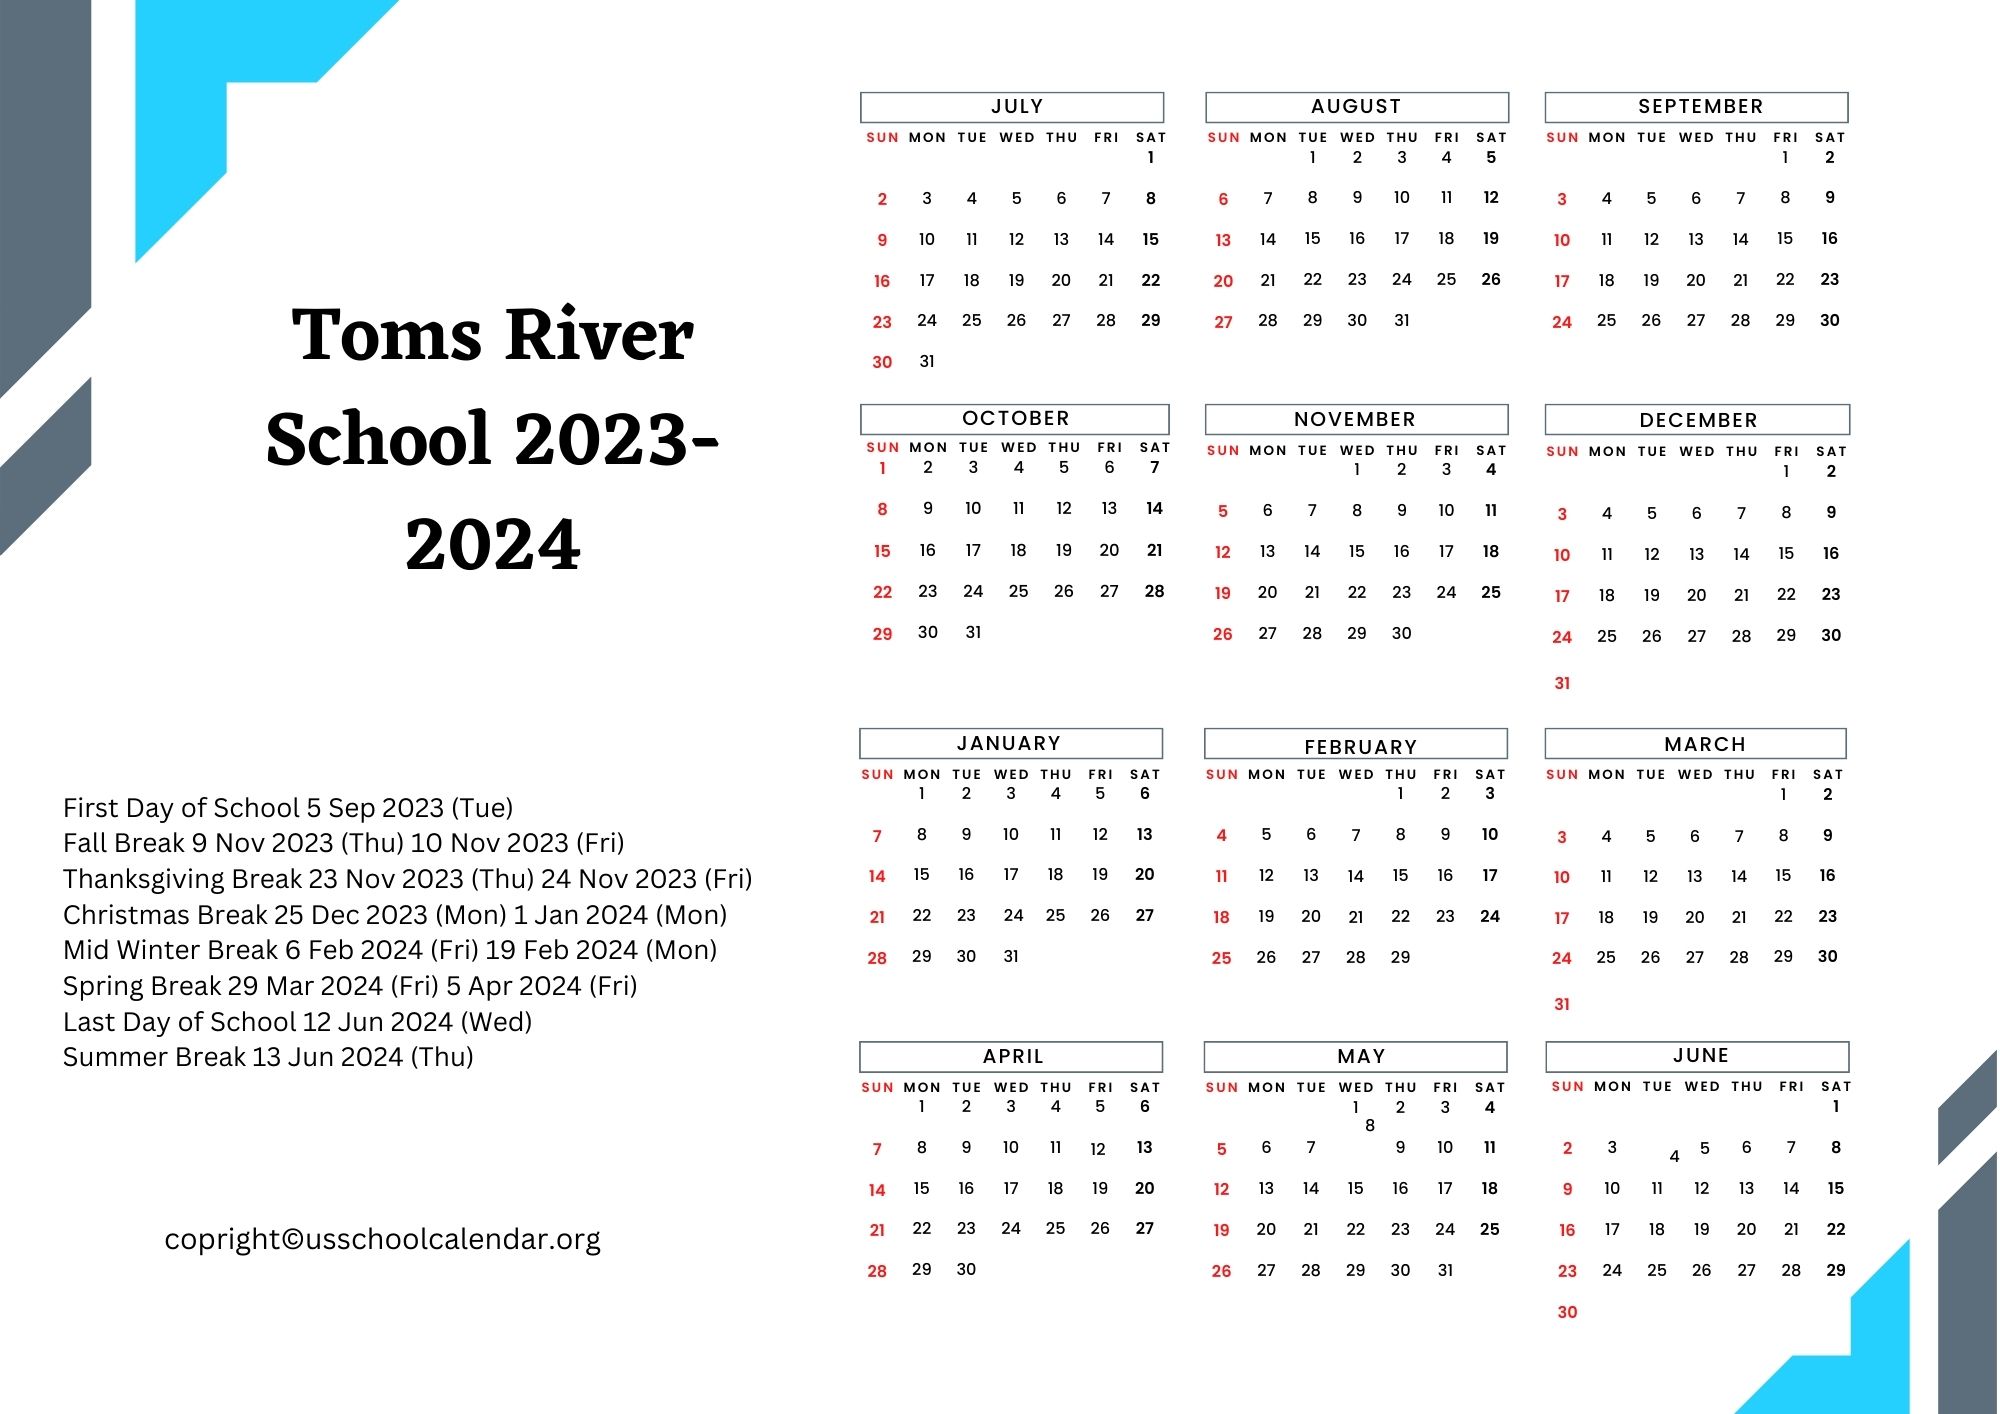 Toms River School Calendar with Holidays 20232024